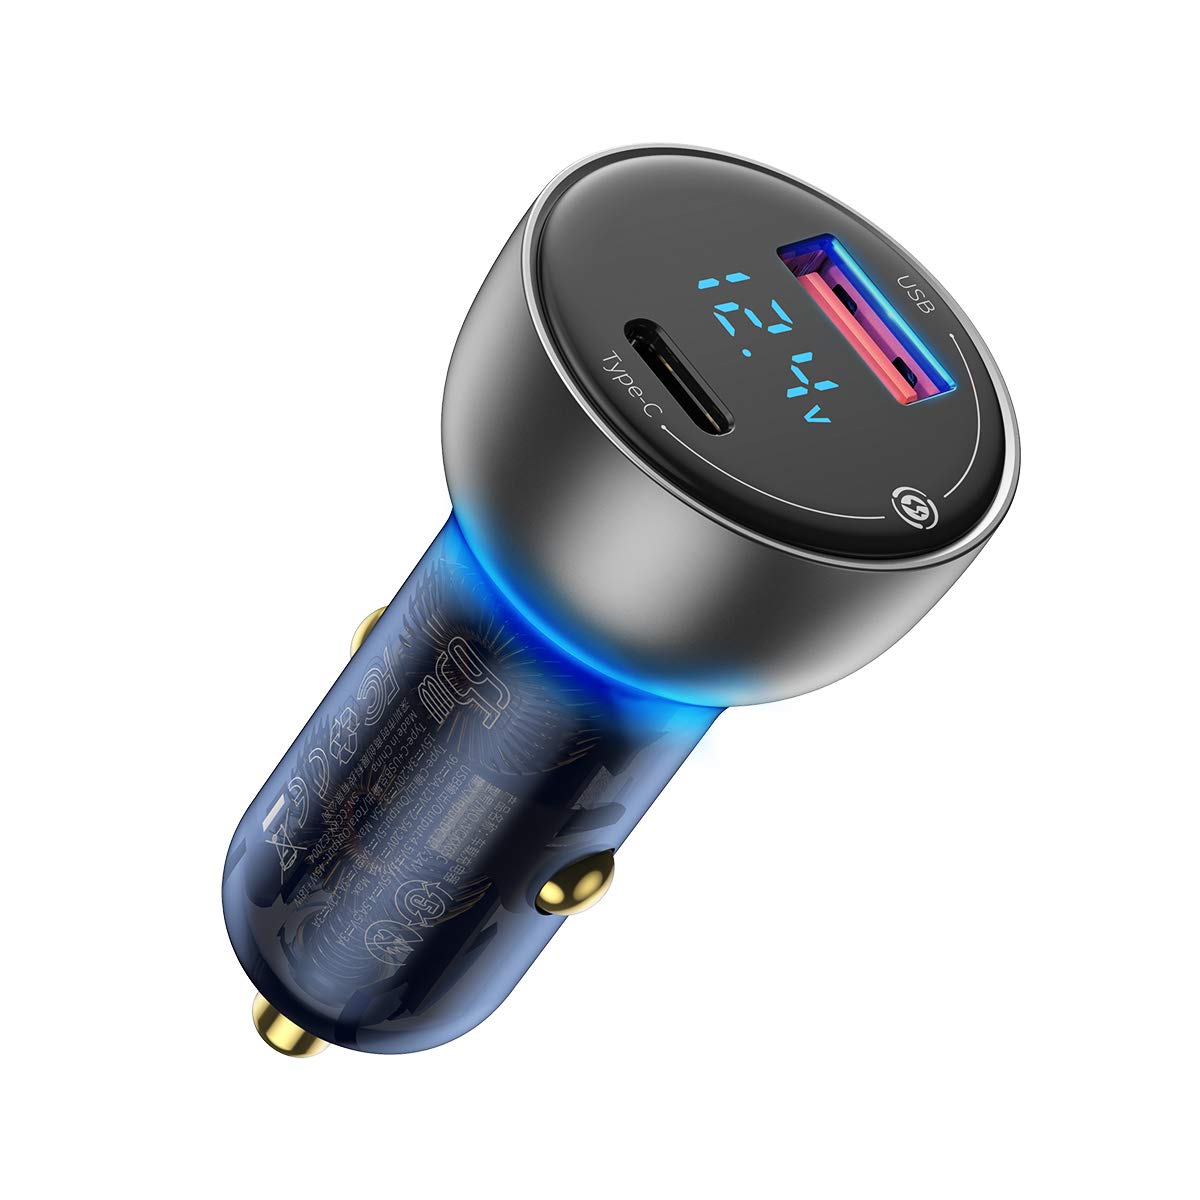 Baseus Super Fast Charging Car Charger 65W Dual Port with LED Display for Laptops, Notebooks and Mobile Phones